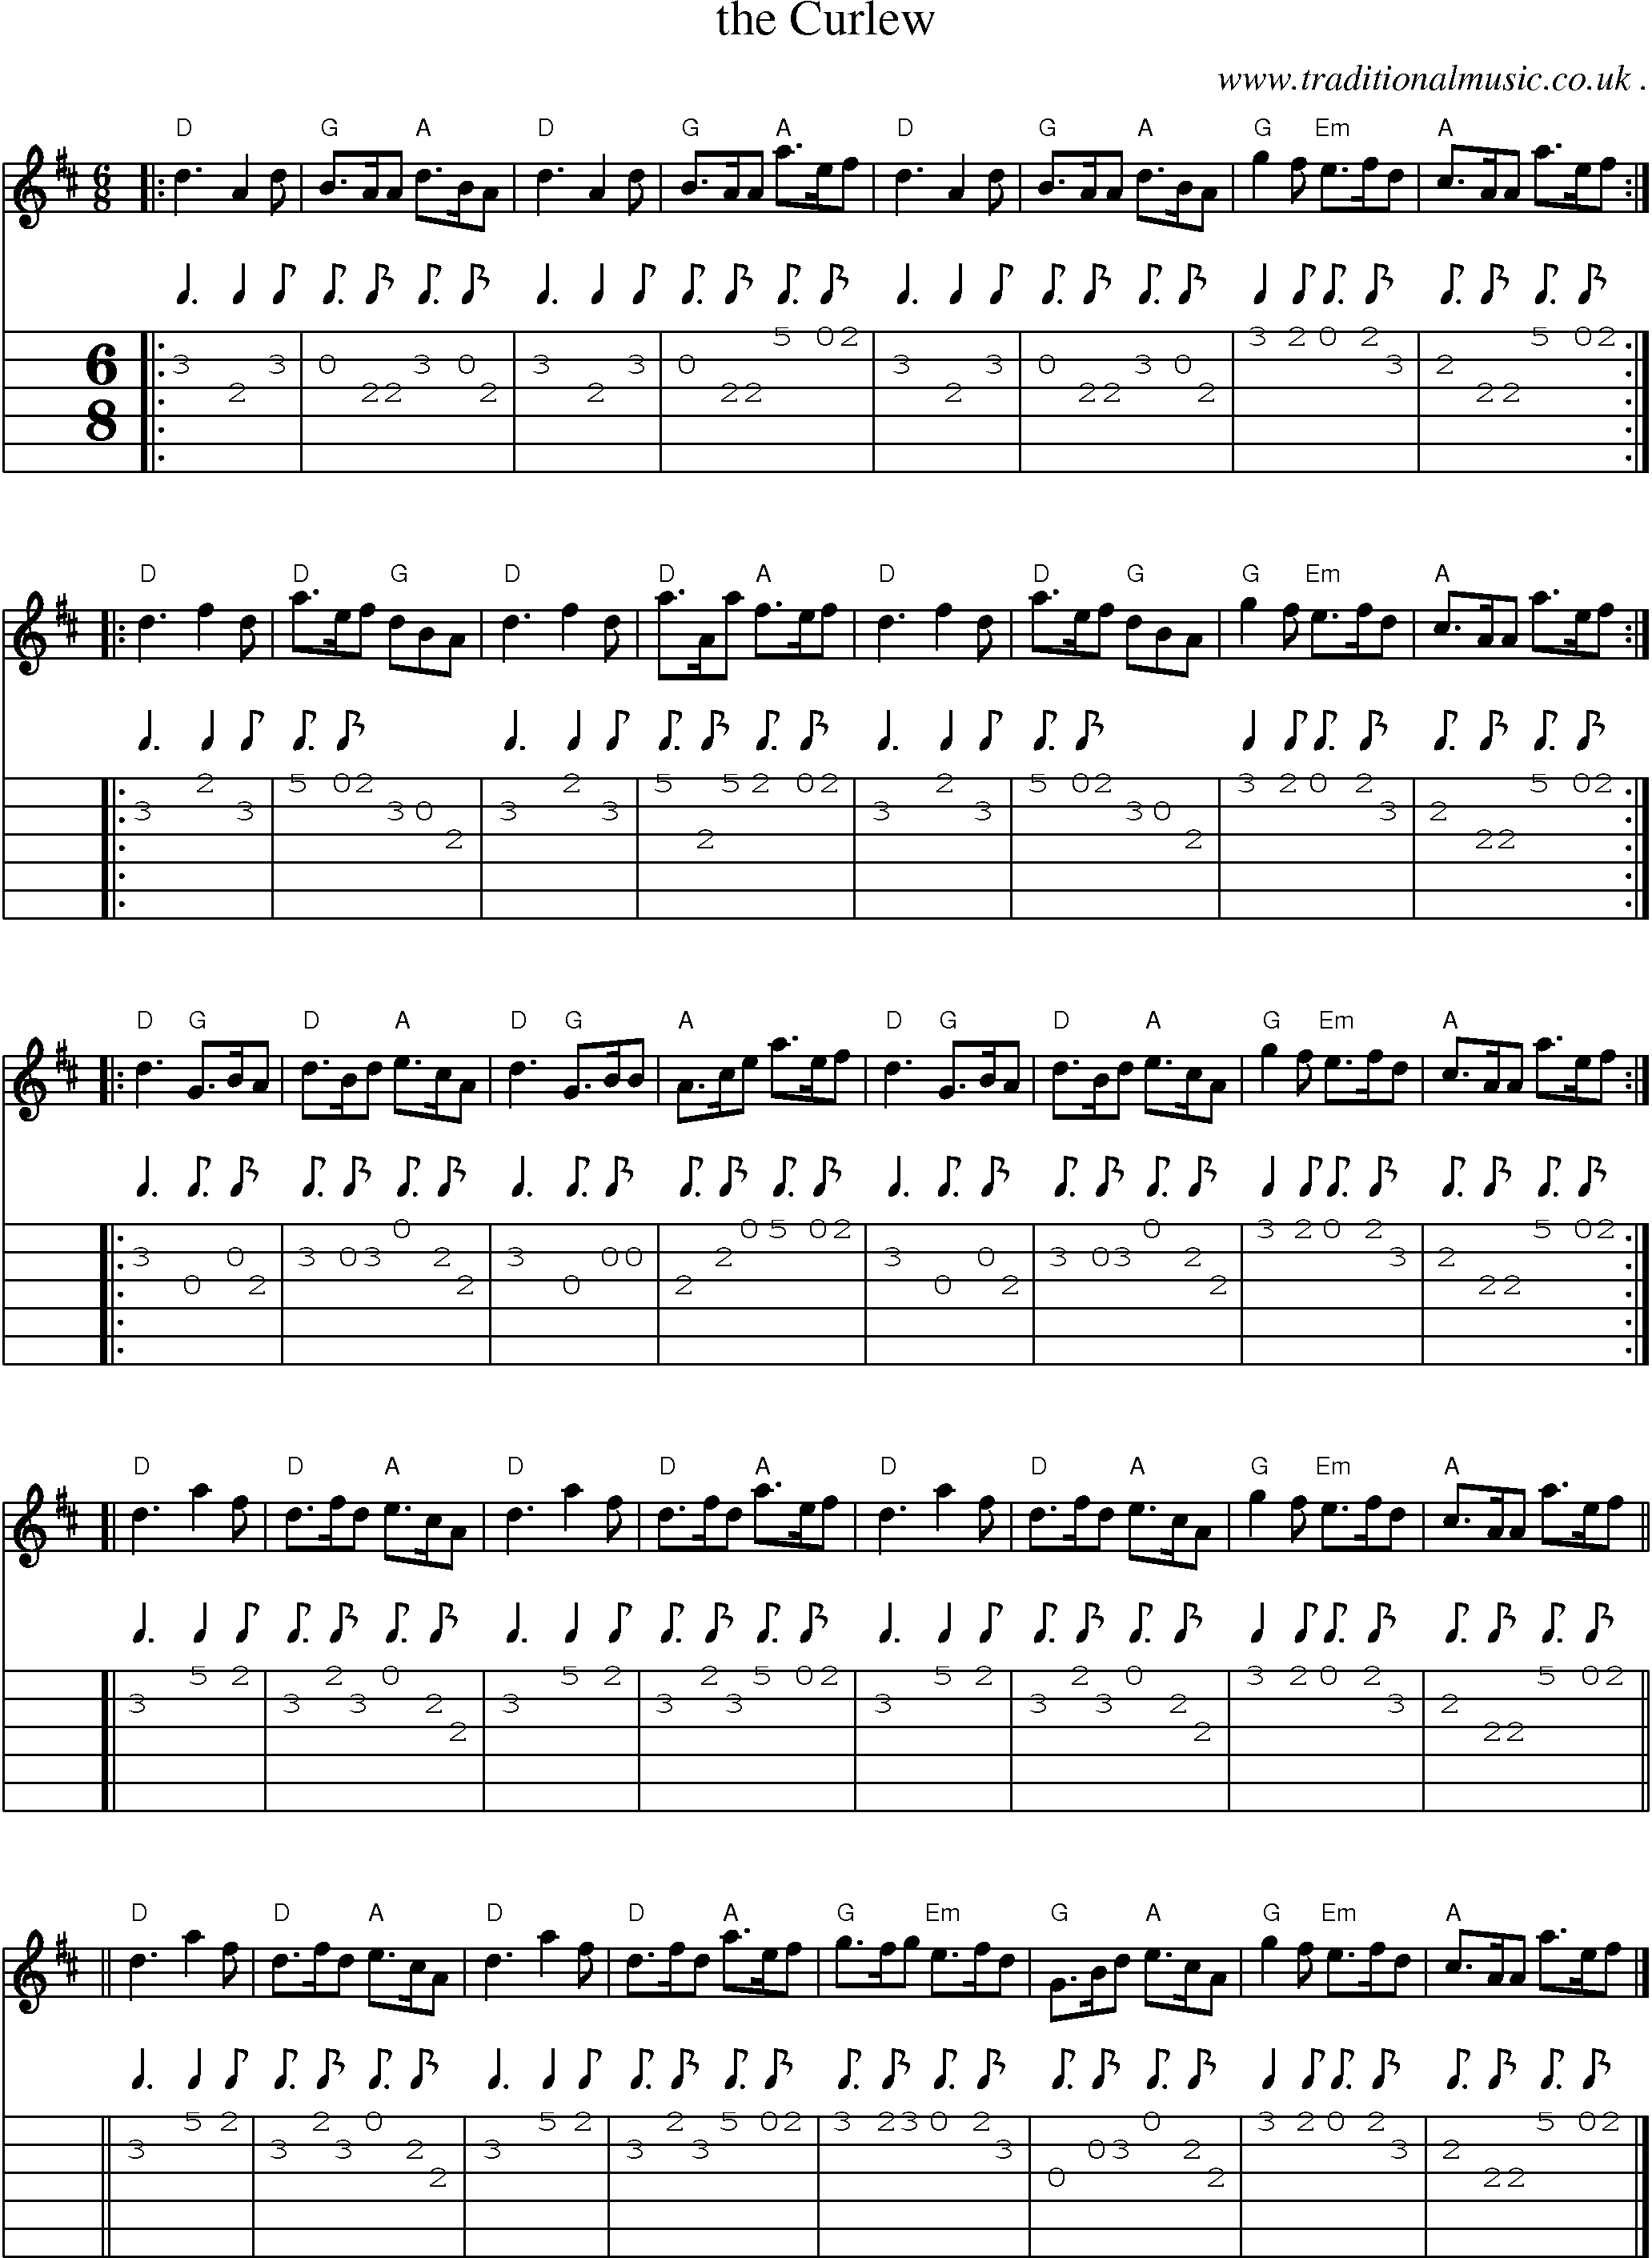 Sheet-music  score, Chords and Guitar Tabs for The Curlew